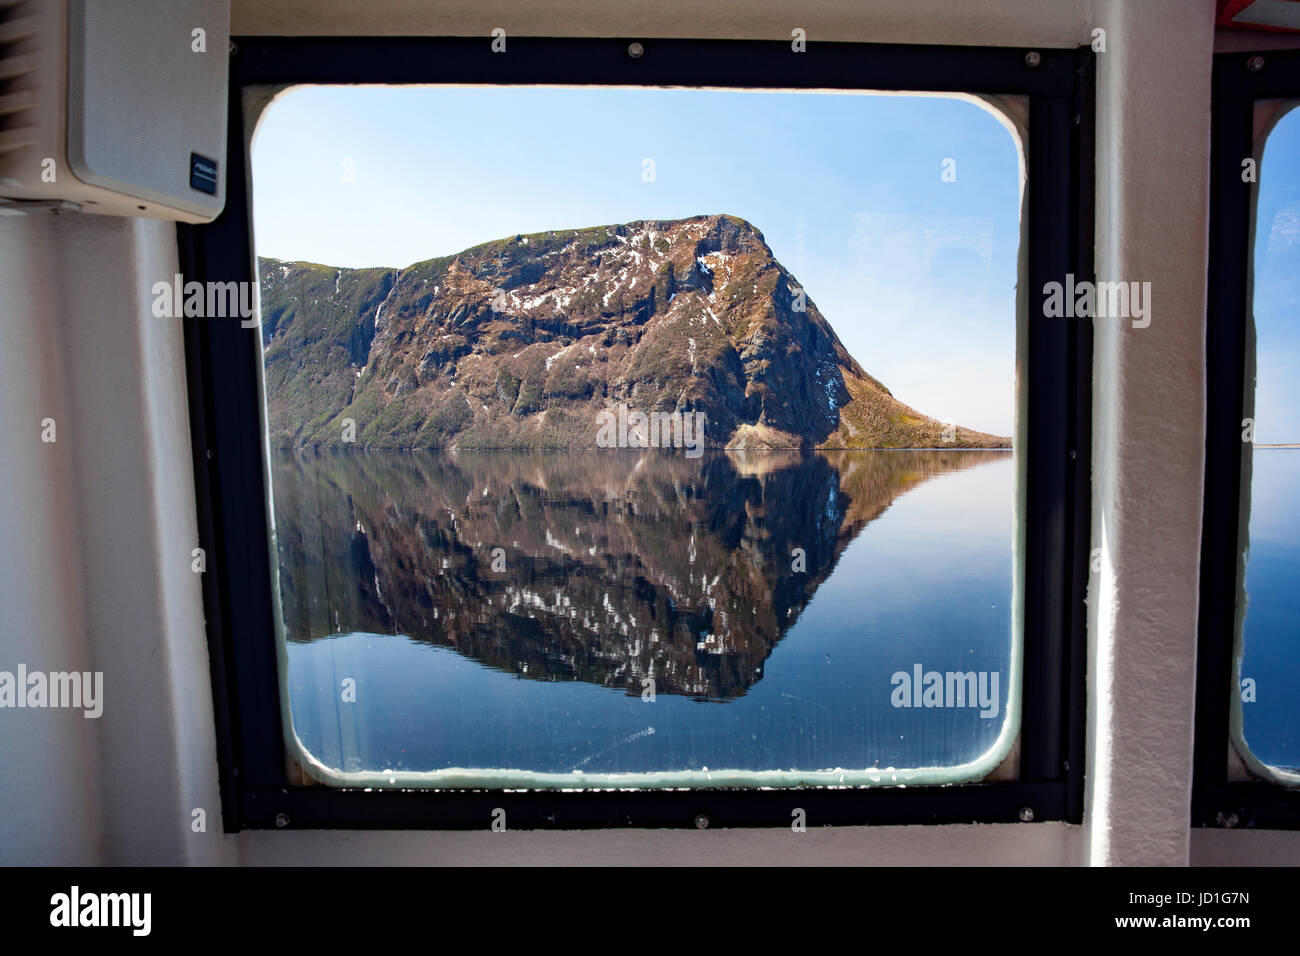 View from window on boat tour on Western Brook Pond, Gros Morne National Park, Newfoundland, Canada Stock Photo